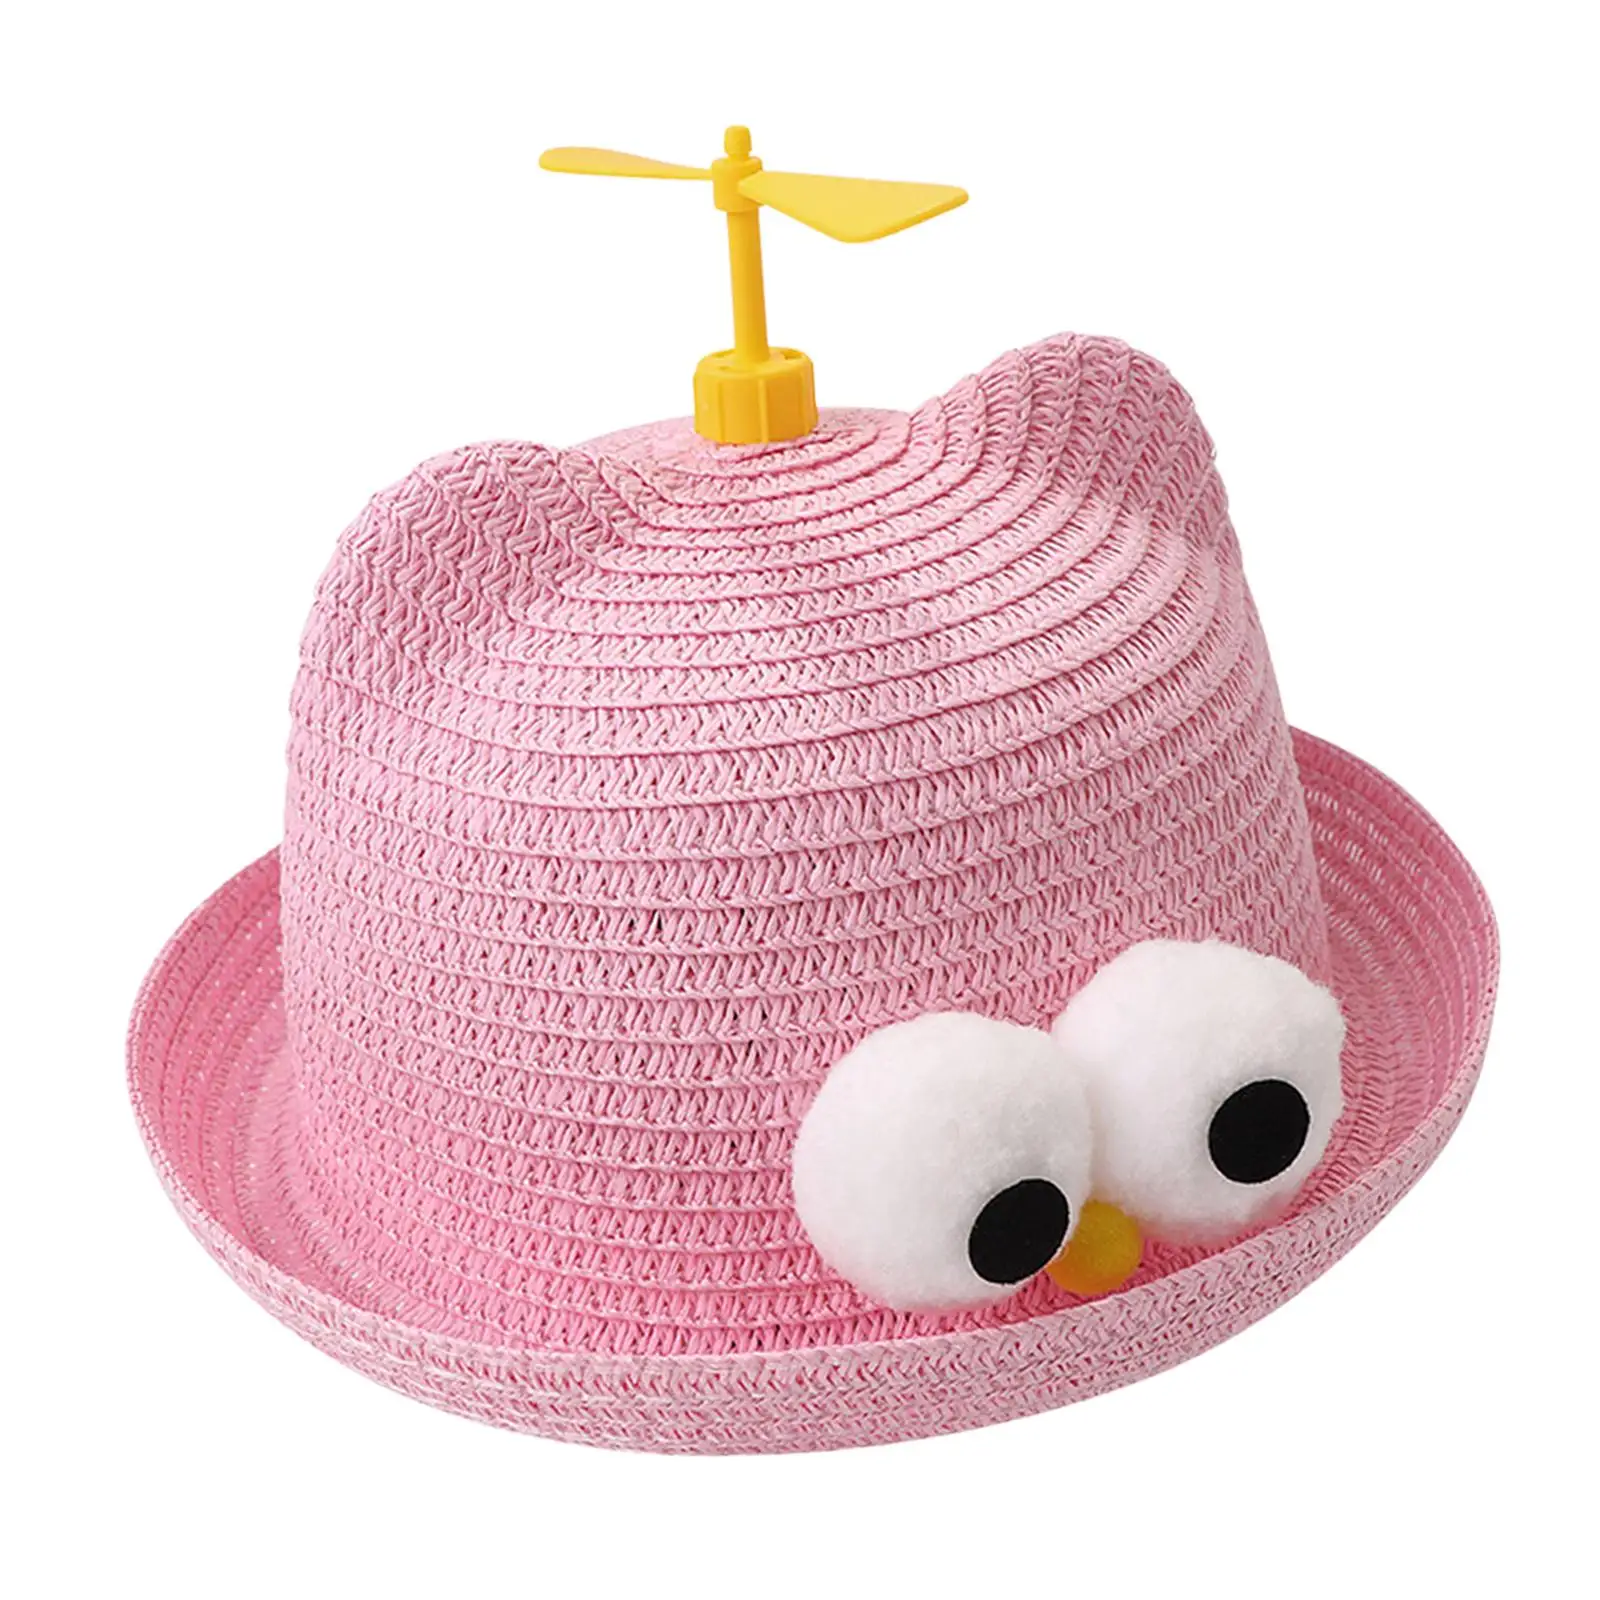 Kids Sun Hat for Girls Boys Breathable Sun Protection Portable Straw Hat Fisherman Cap for Outdoor Sightseeing Short Trips